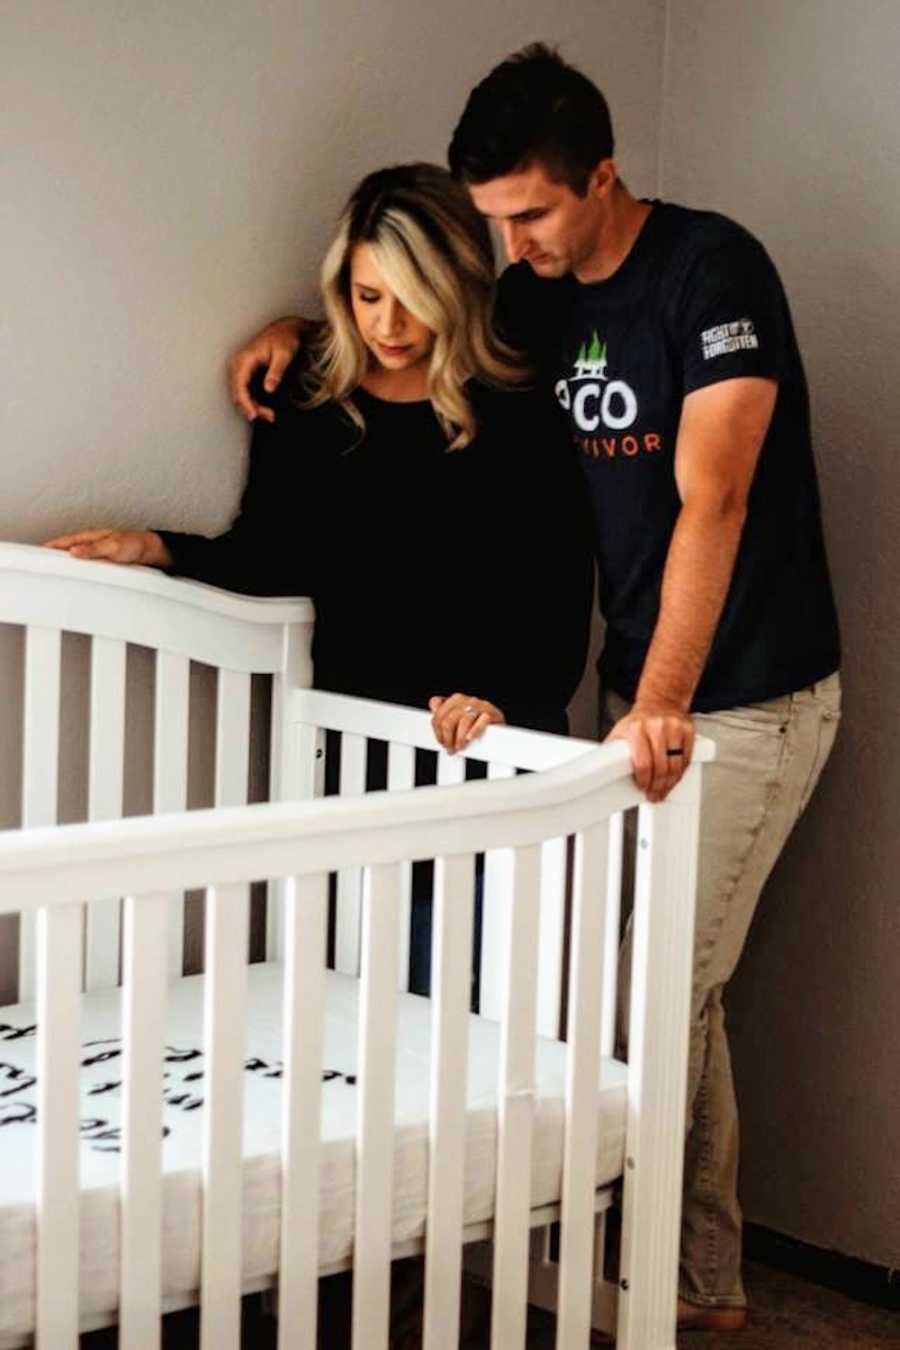 Husband and wife stands over crib meant for their adopted child